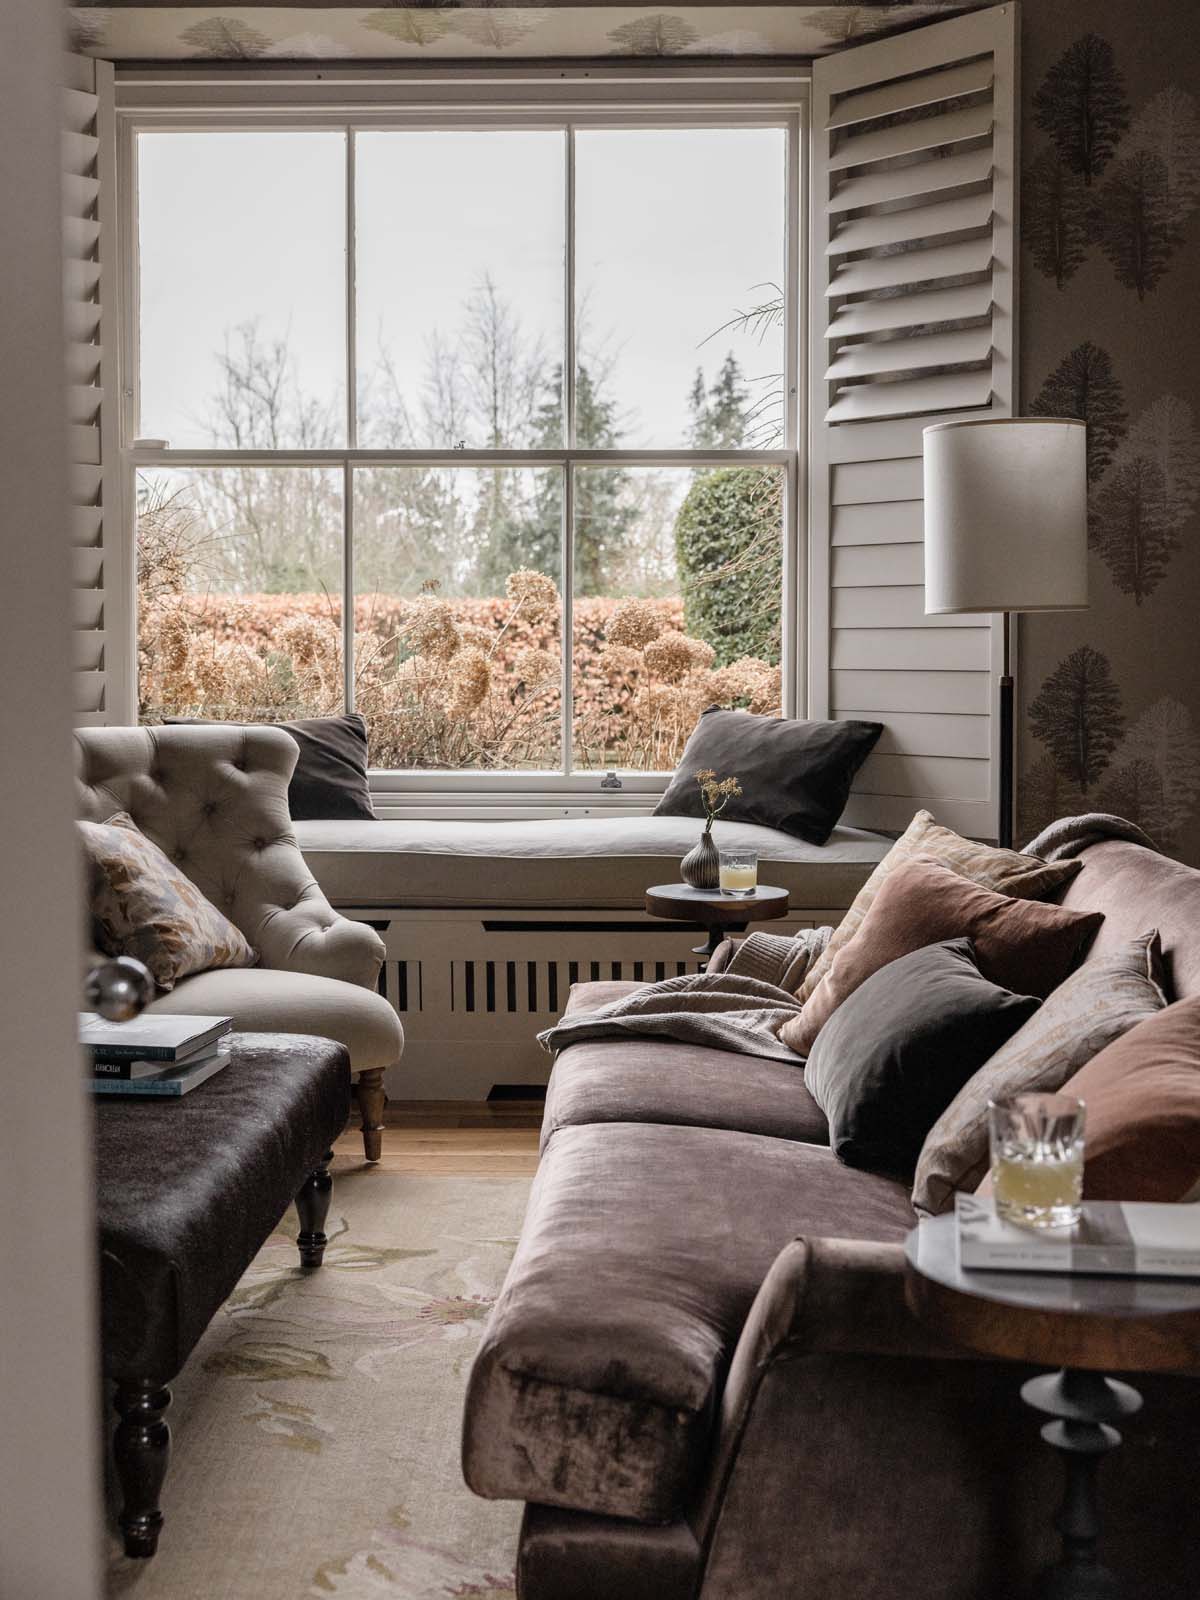 Luxurious living room with neutral soft furnishings and a large window with plantation shutters